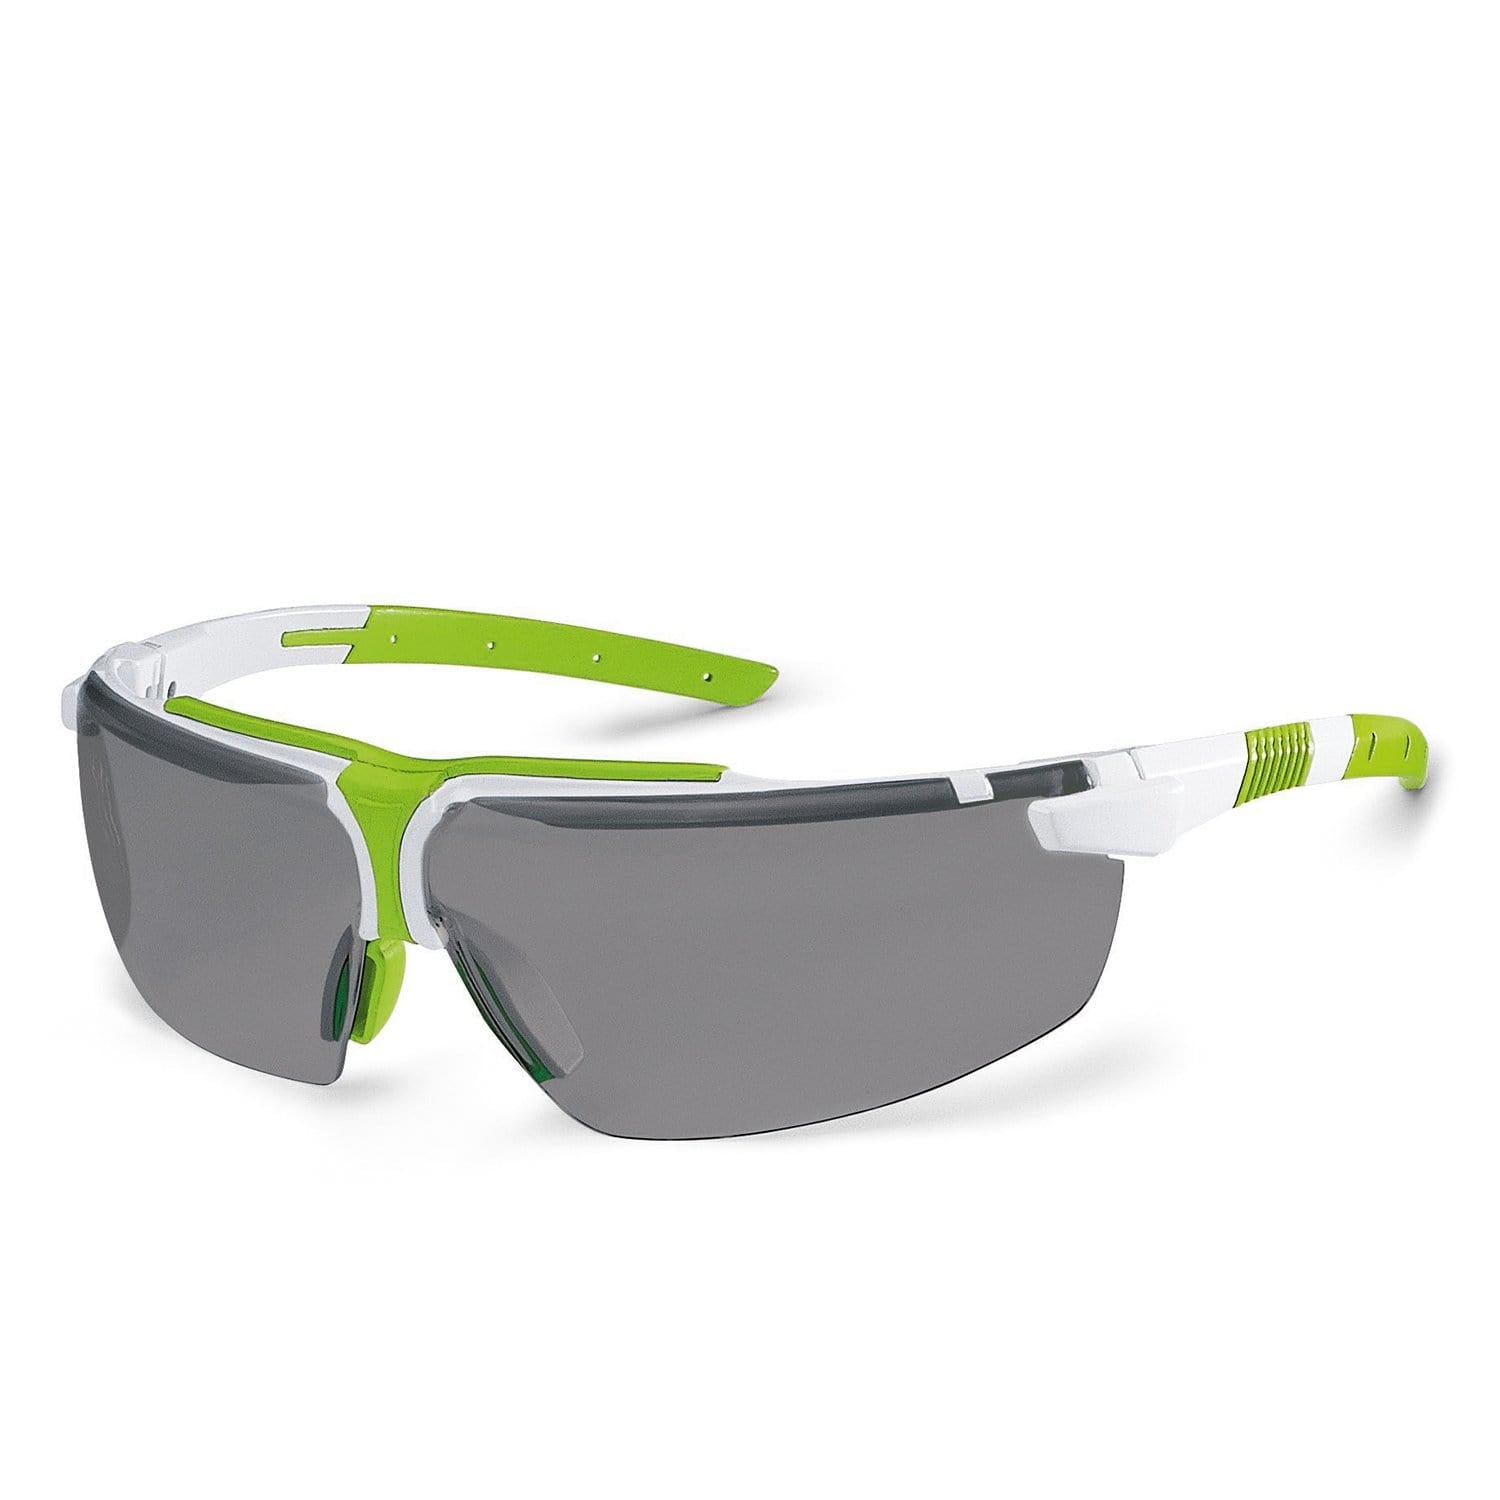 UVEX I-3 Eye Protection Spectacles